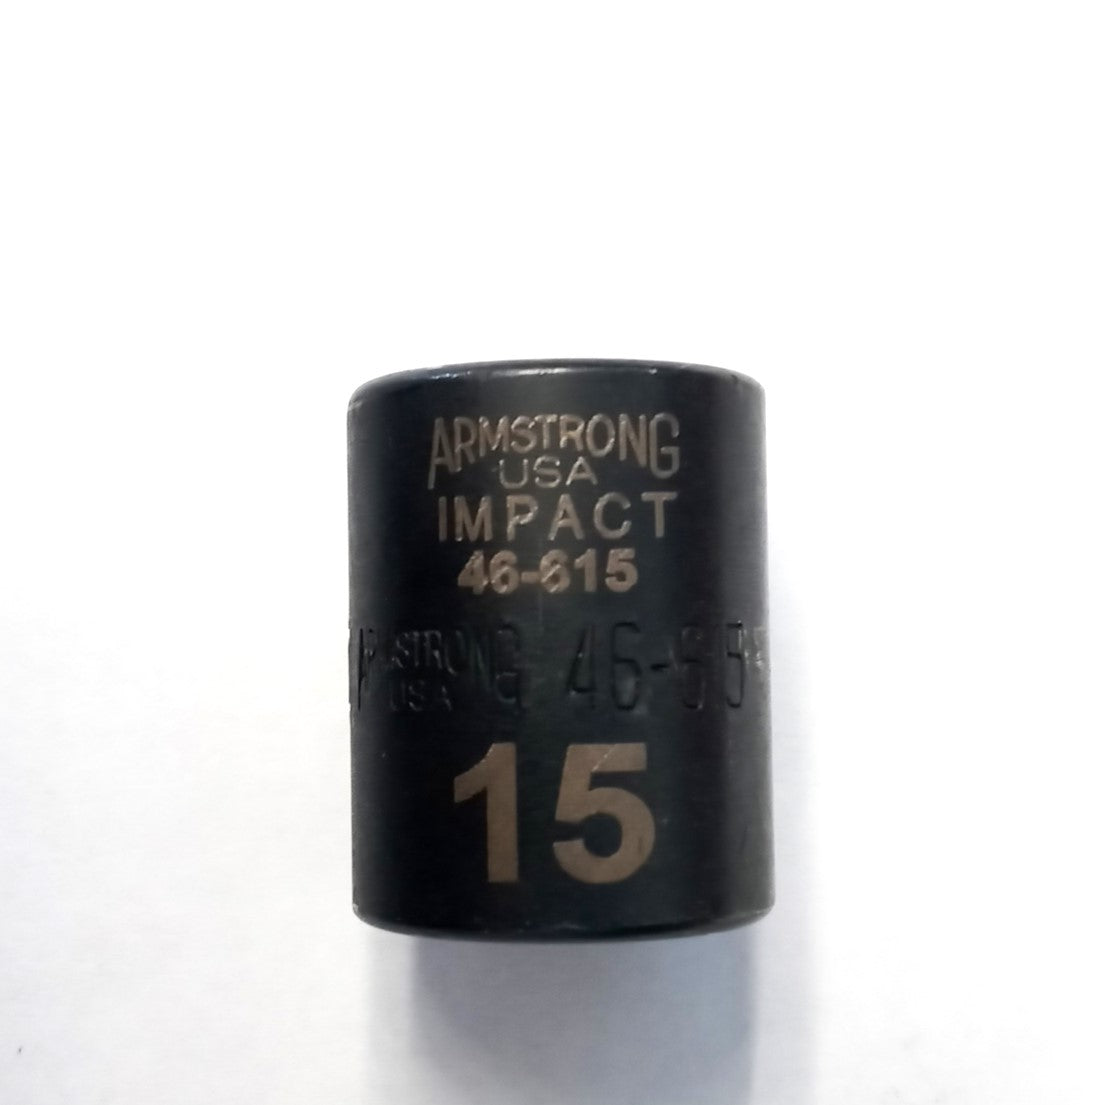 Armstrong 46-615 15 mm 3/8" Drive 6 Point Impact Socket USA